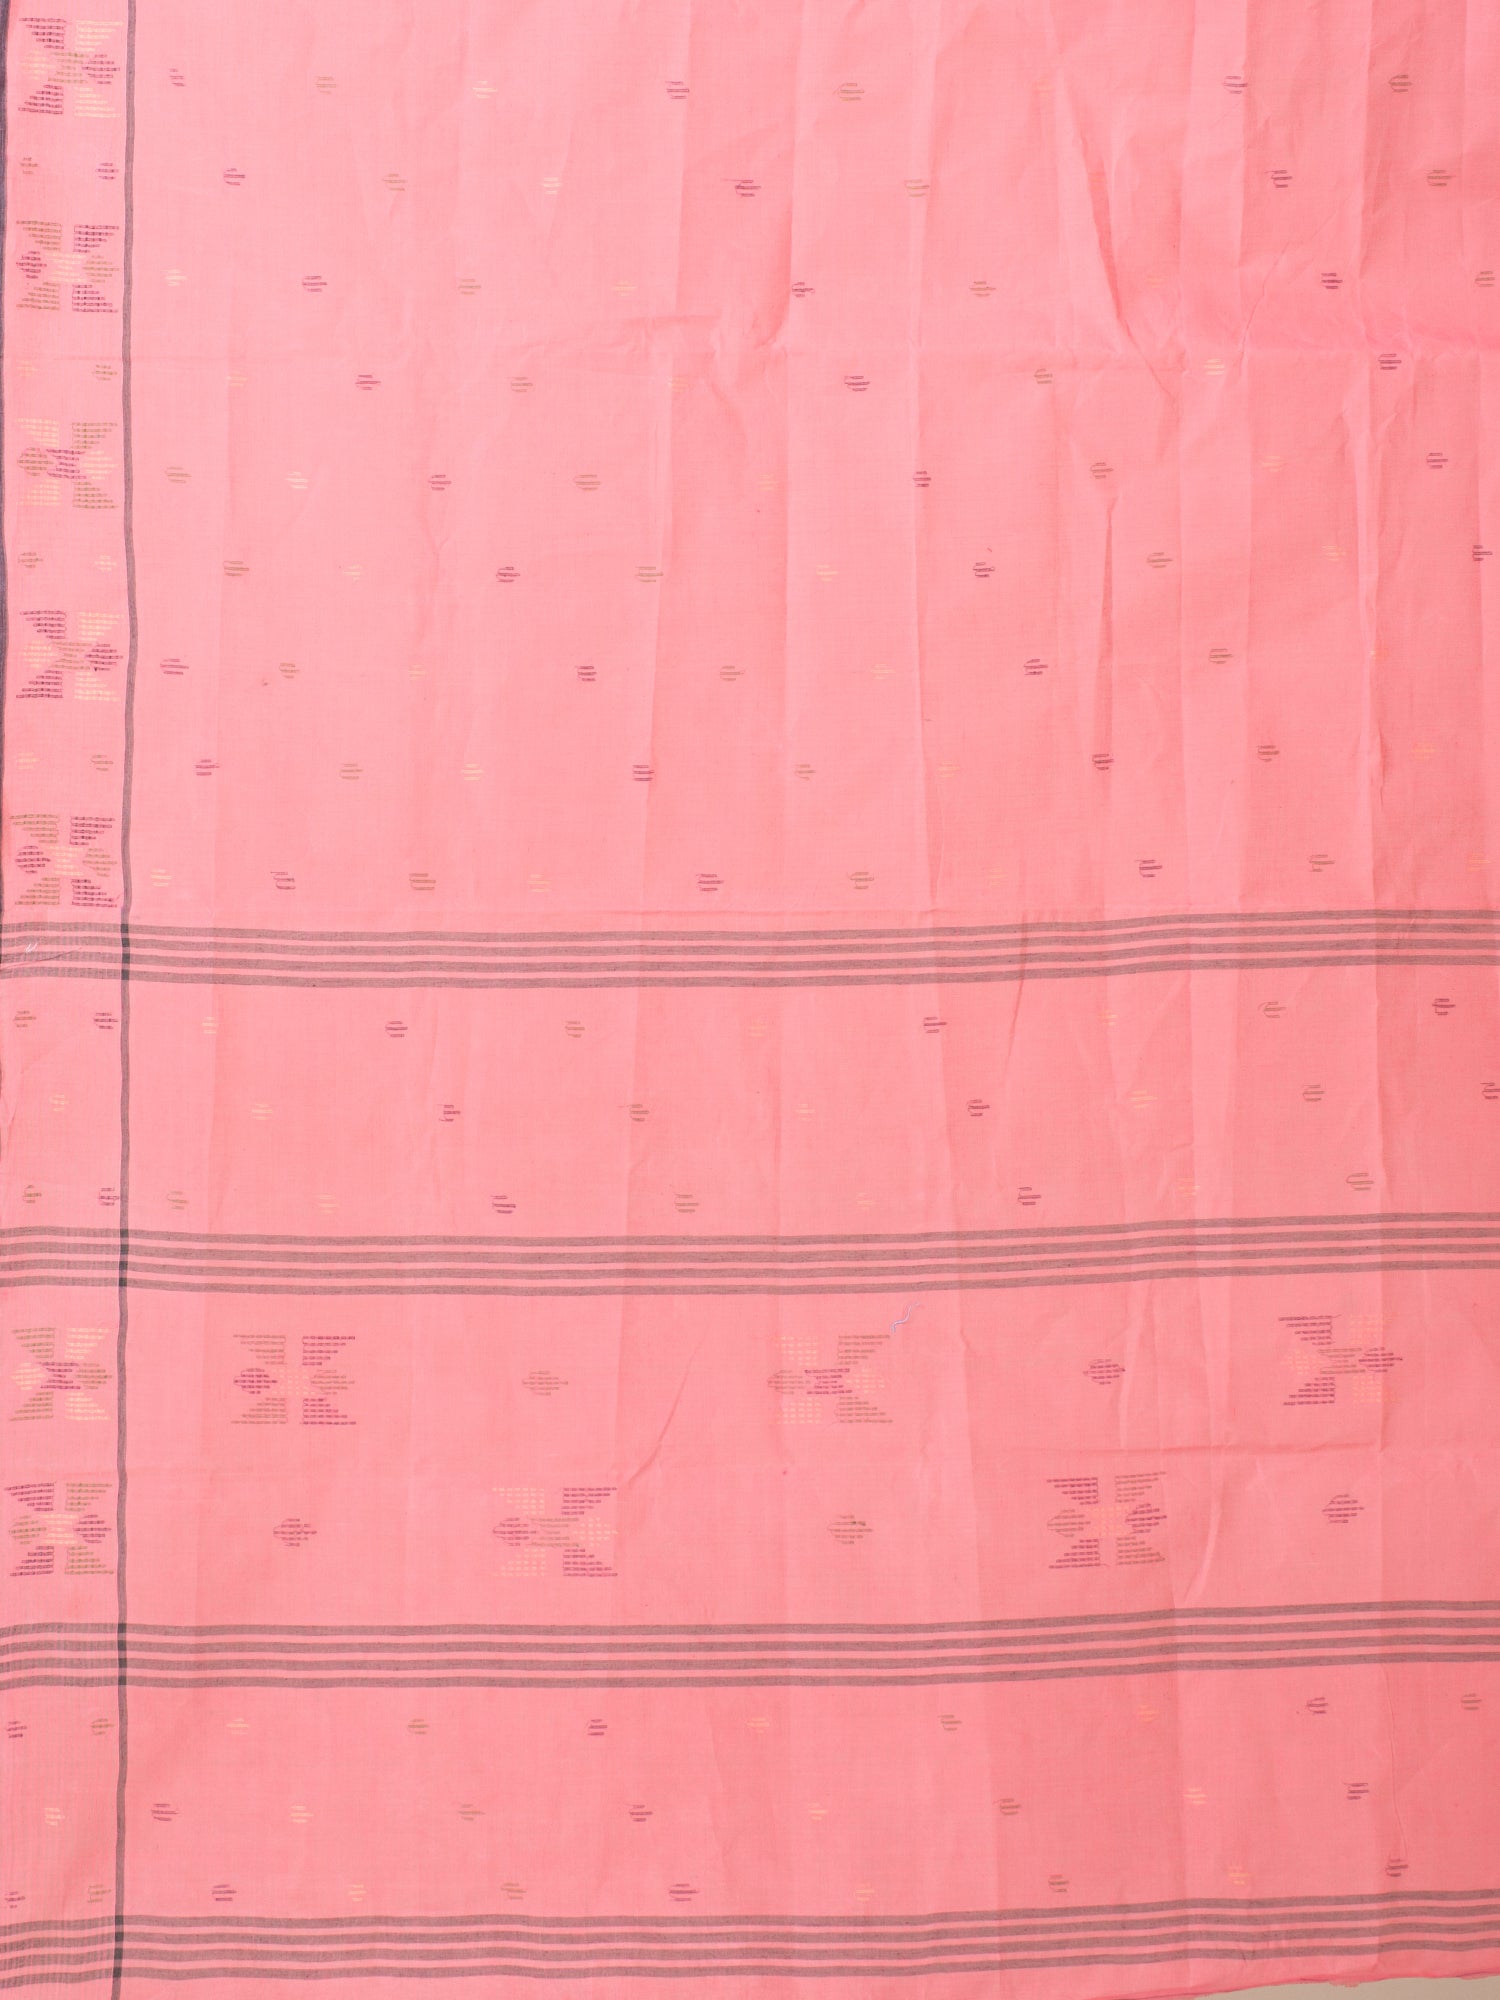 Women's Pink Pure Cotton Hand Woven Saree With Buti Work Without Blouse-Sajasajo